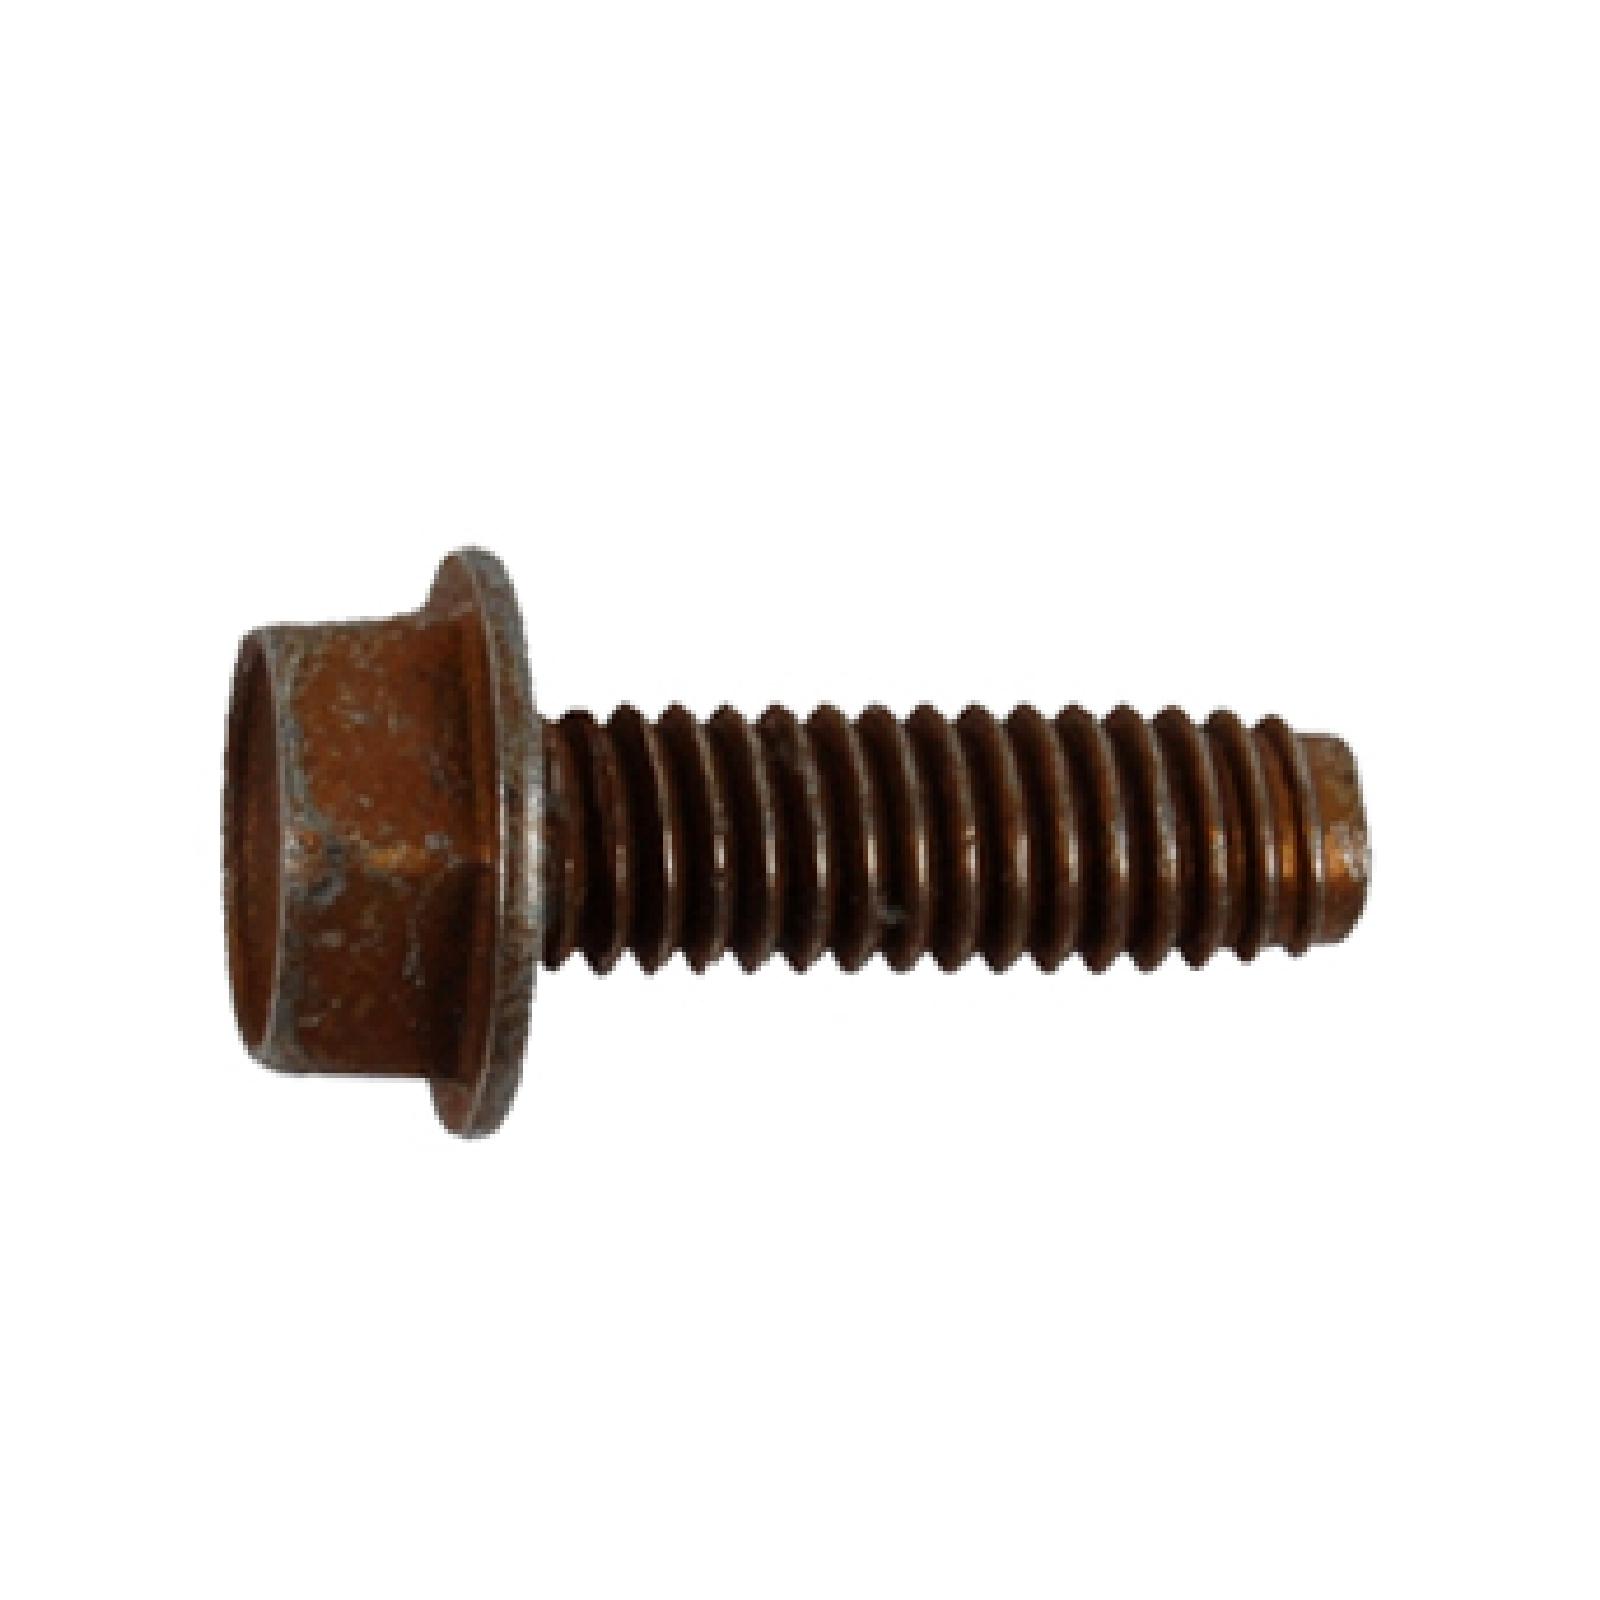 SCREW HEX WASH TAP part# 7100602 by MTD